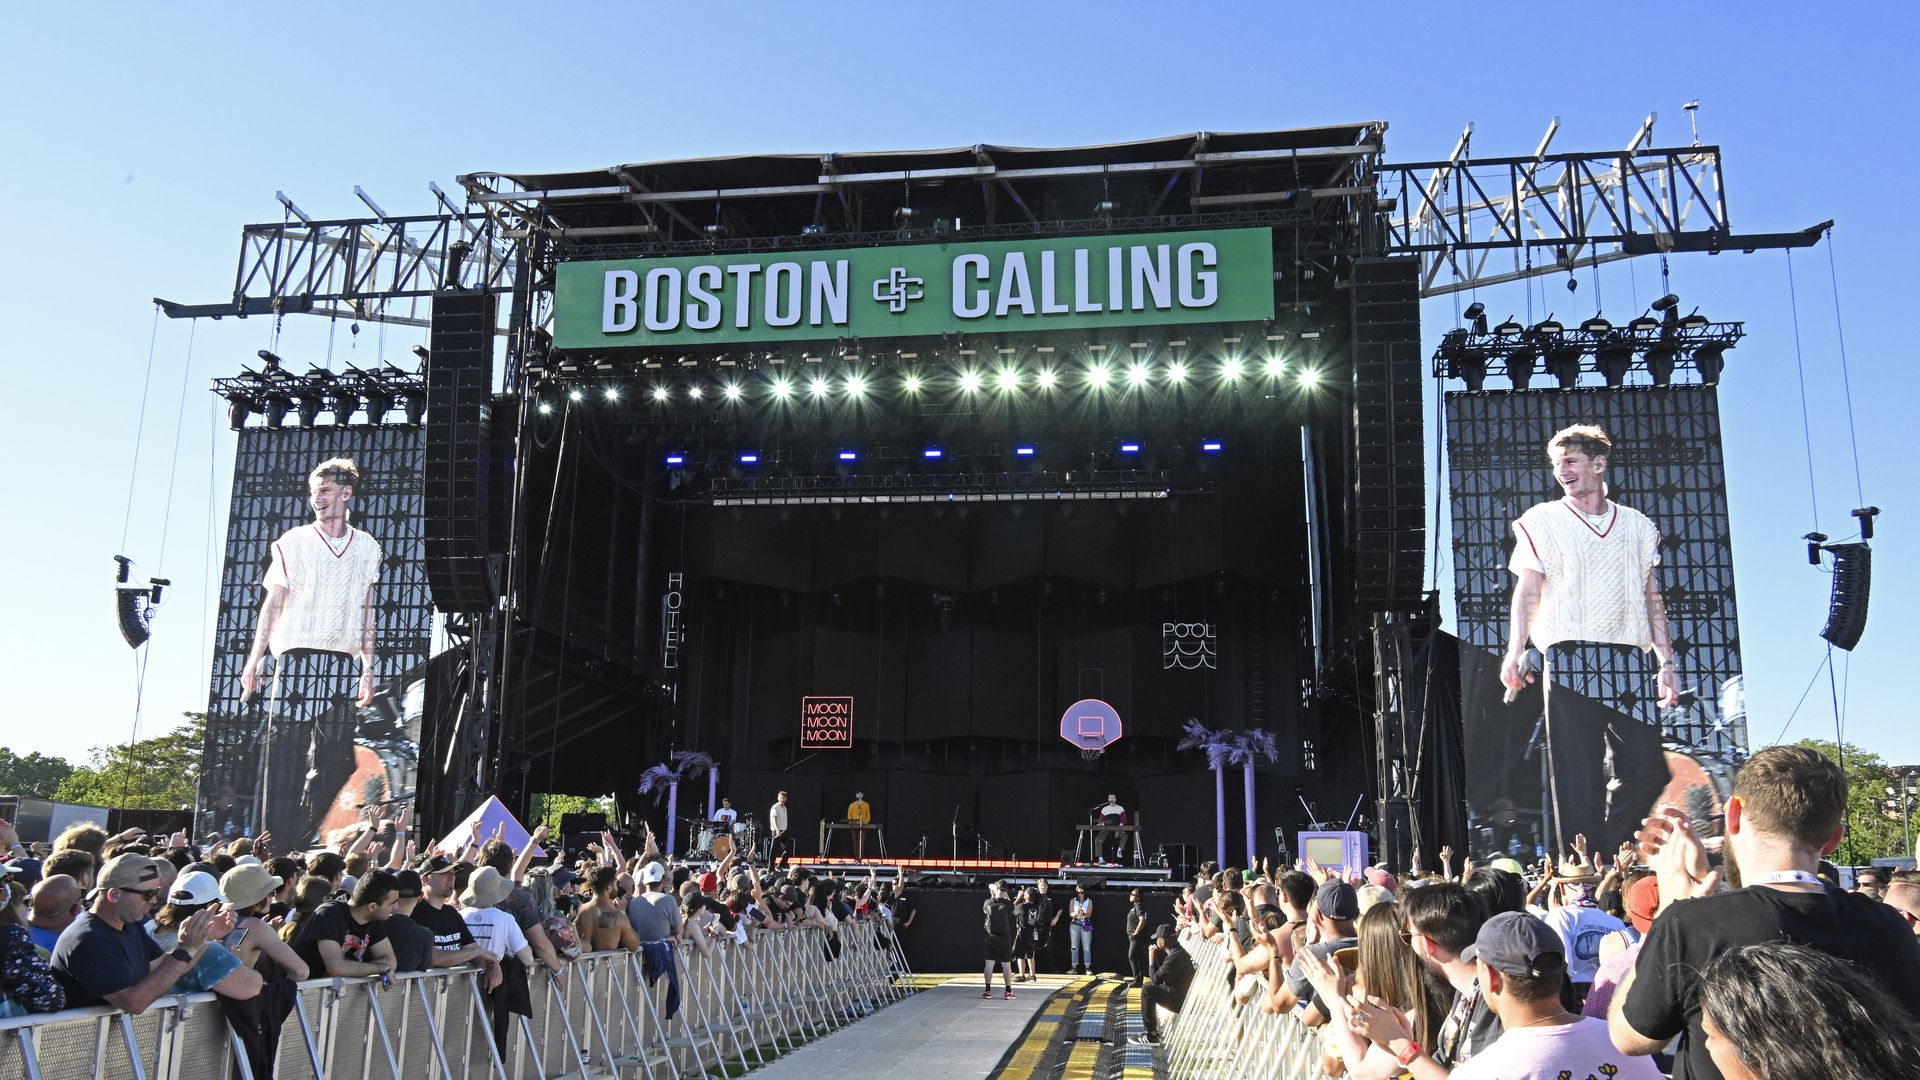 The Boston Calling stage